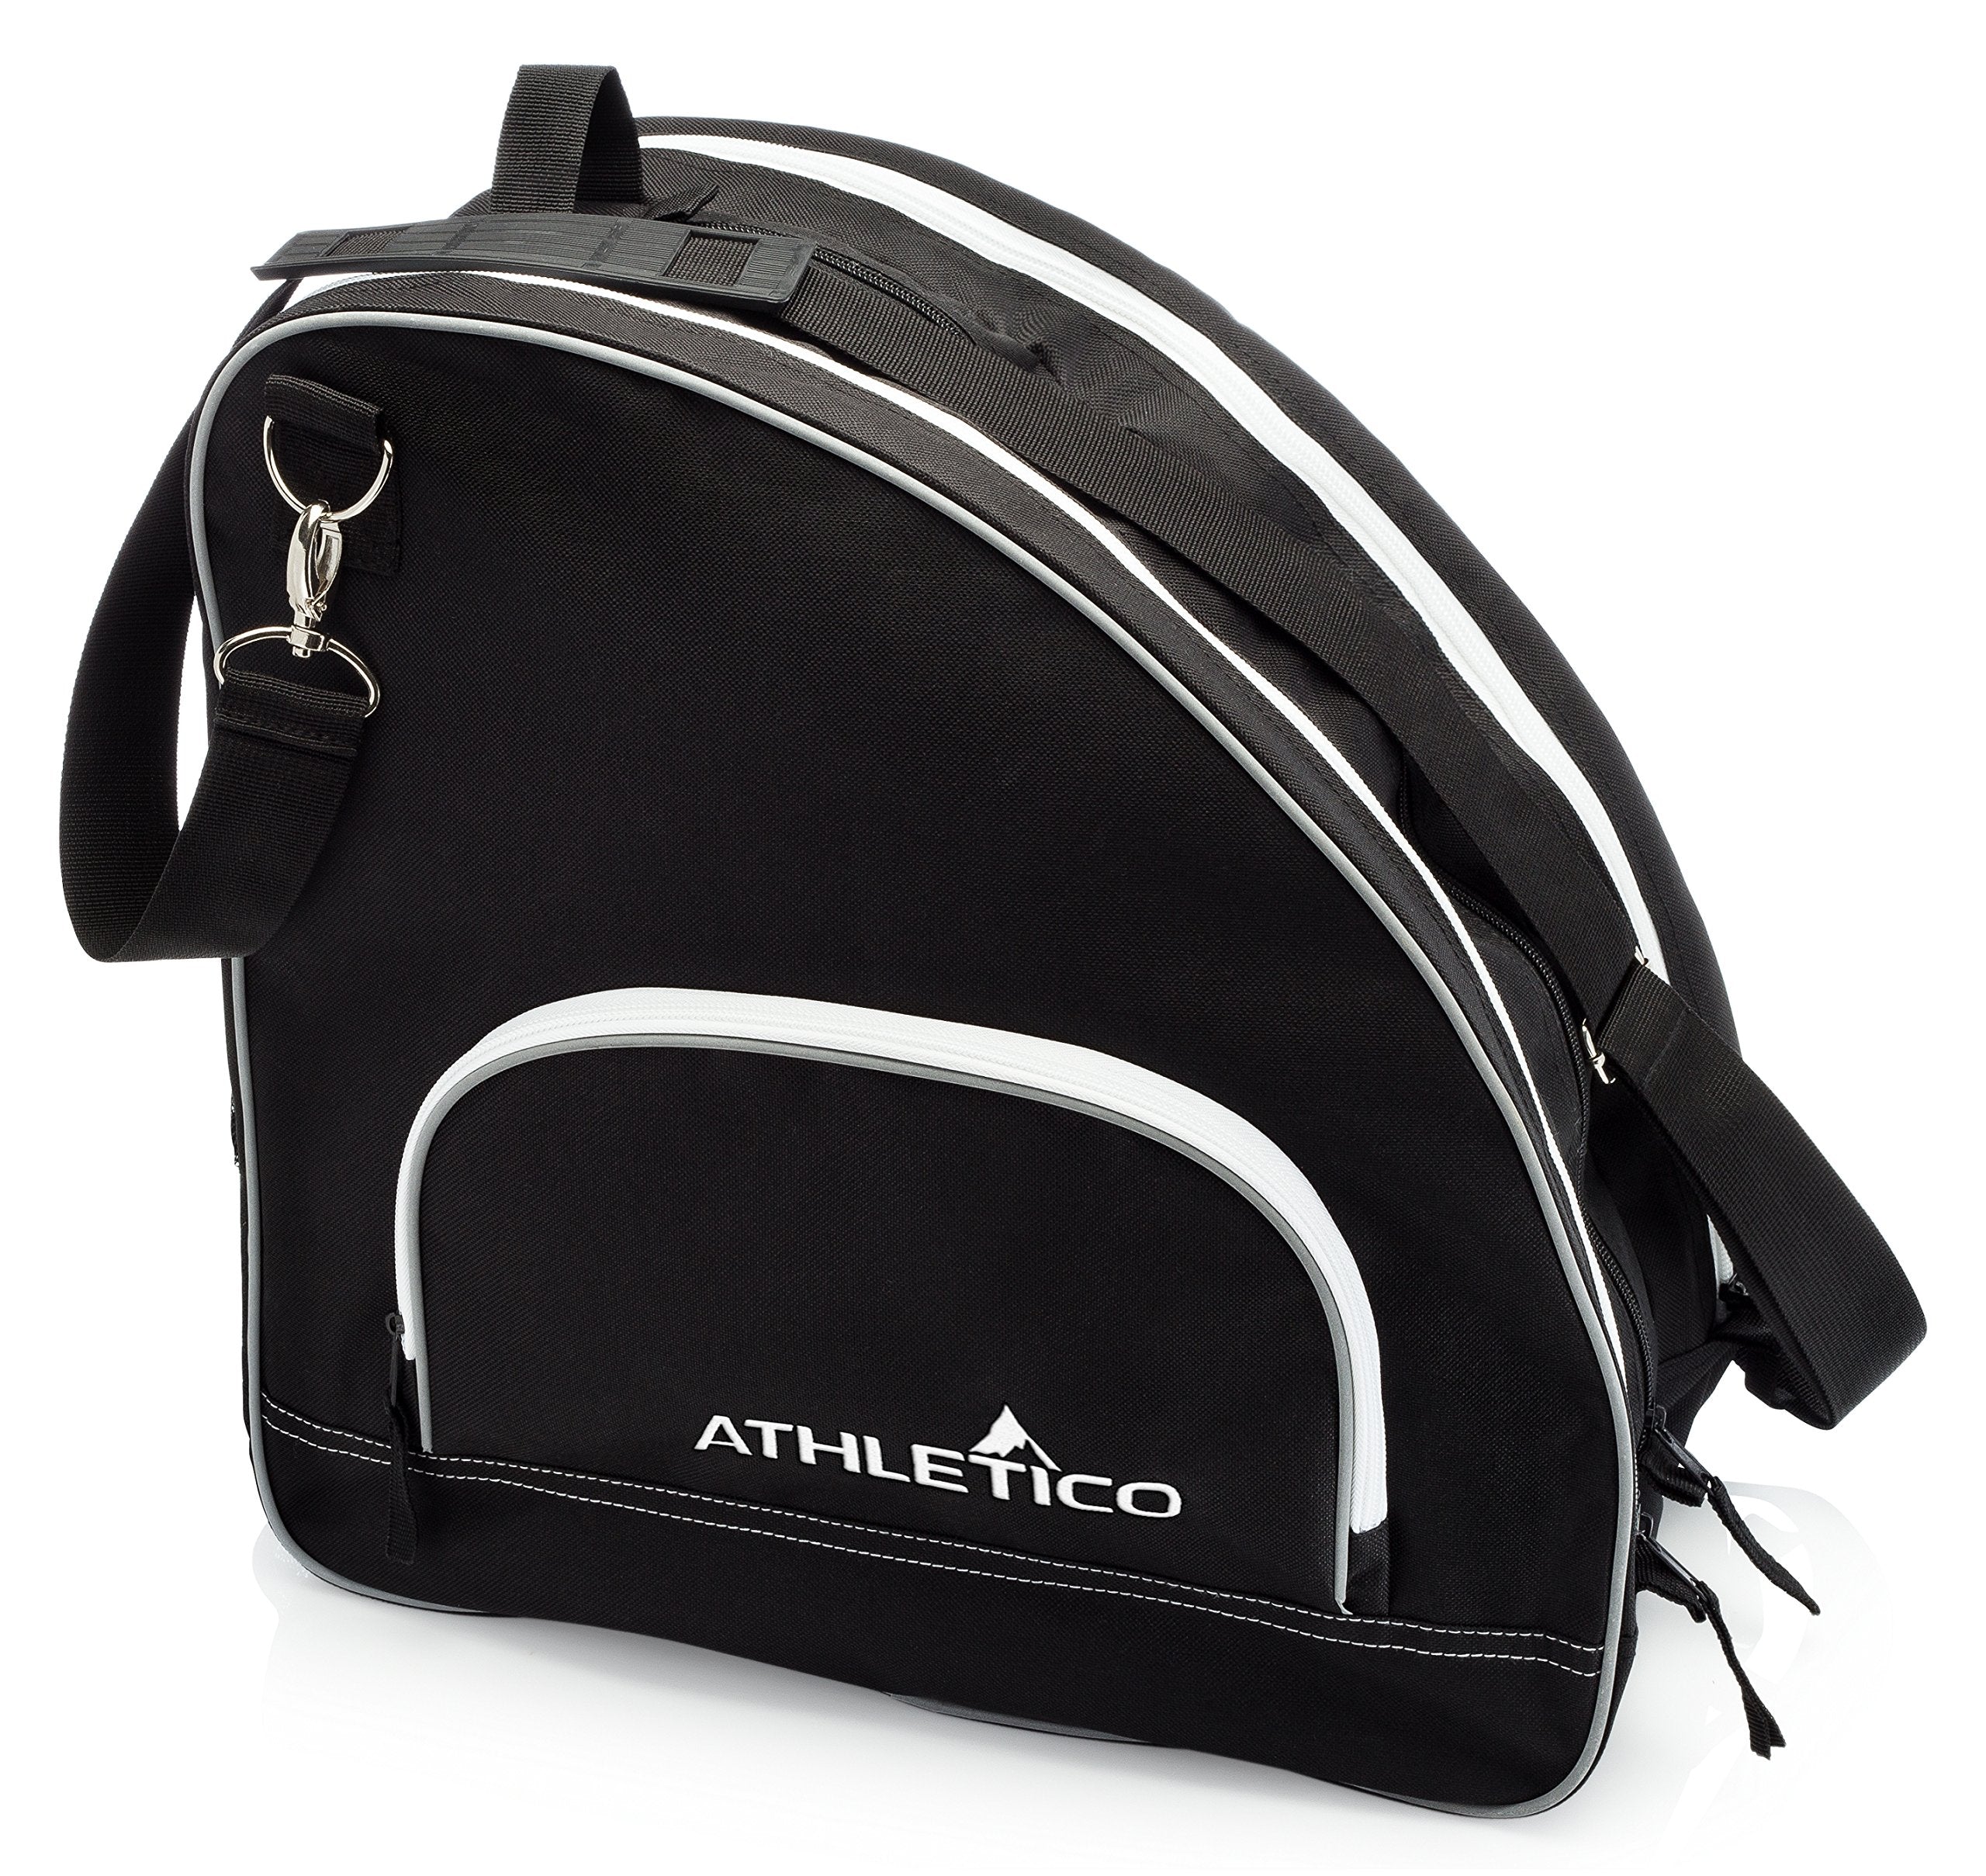 Athletico Ice & Inline Skate Bag - Premium Bag to Carry Ice Skates, Roller Skates, Inline Skates for Both Kids and Adults  - Acceptable